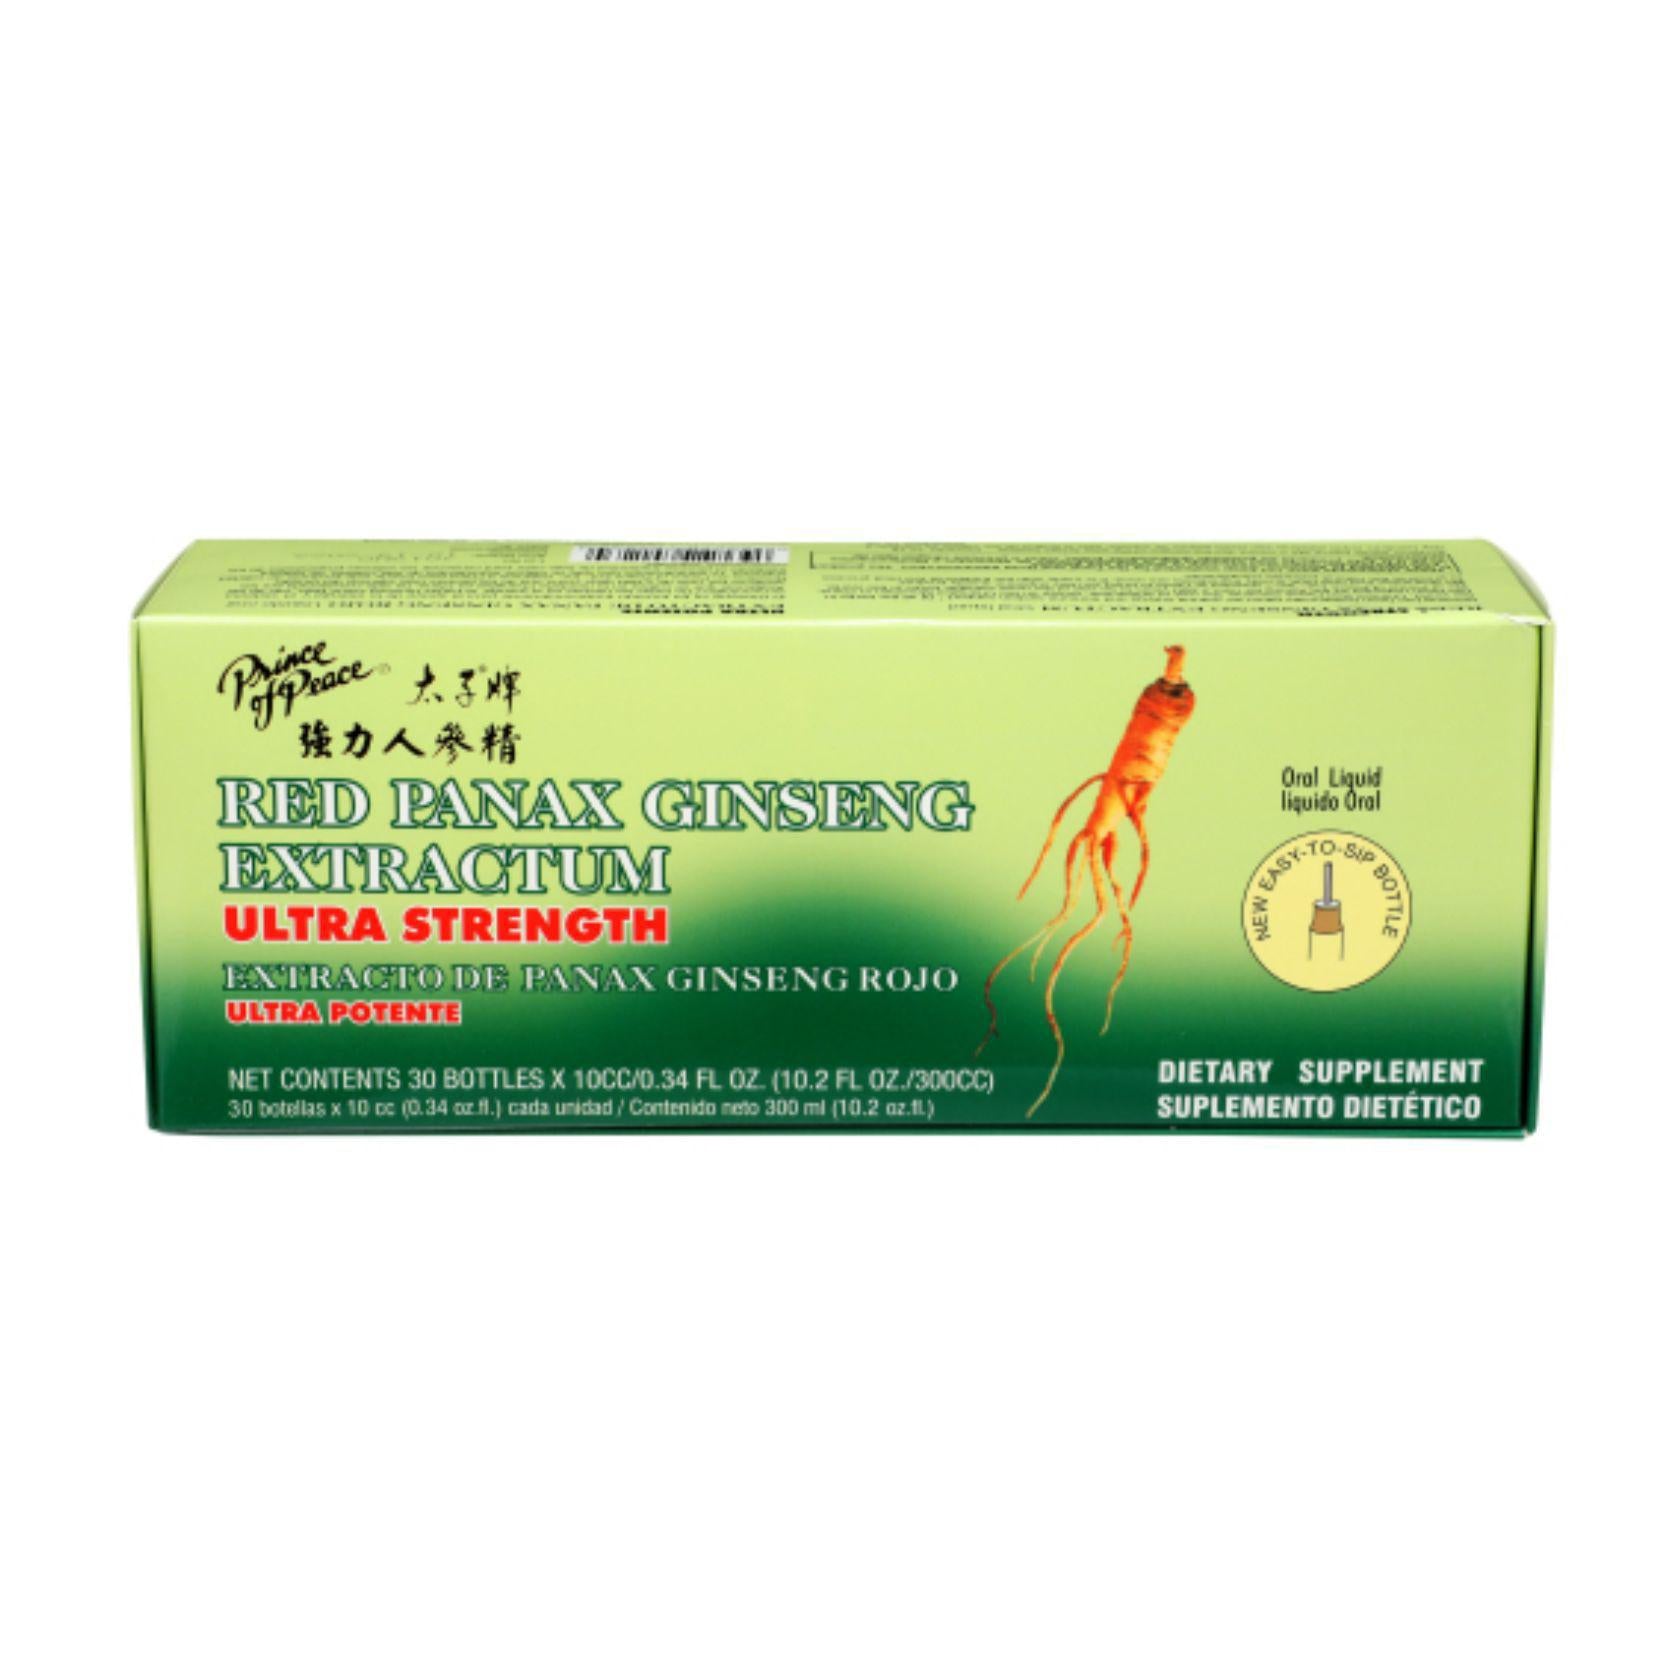 Red Panax Ginseng Extractum Ultra Strength 30 ct